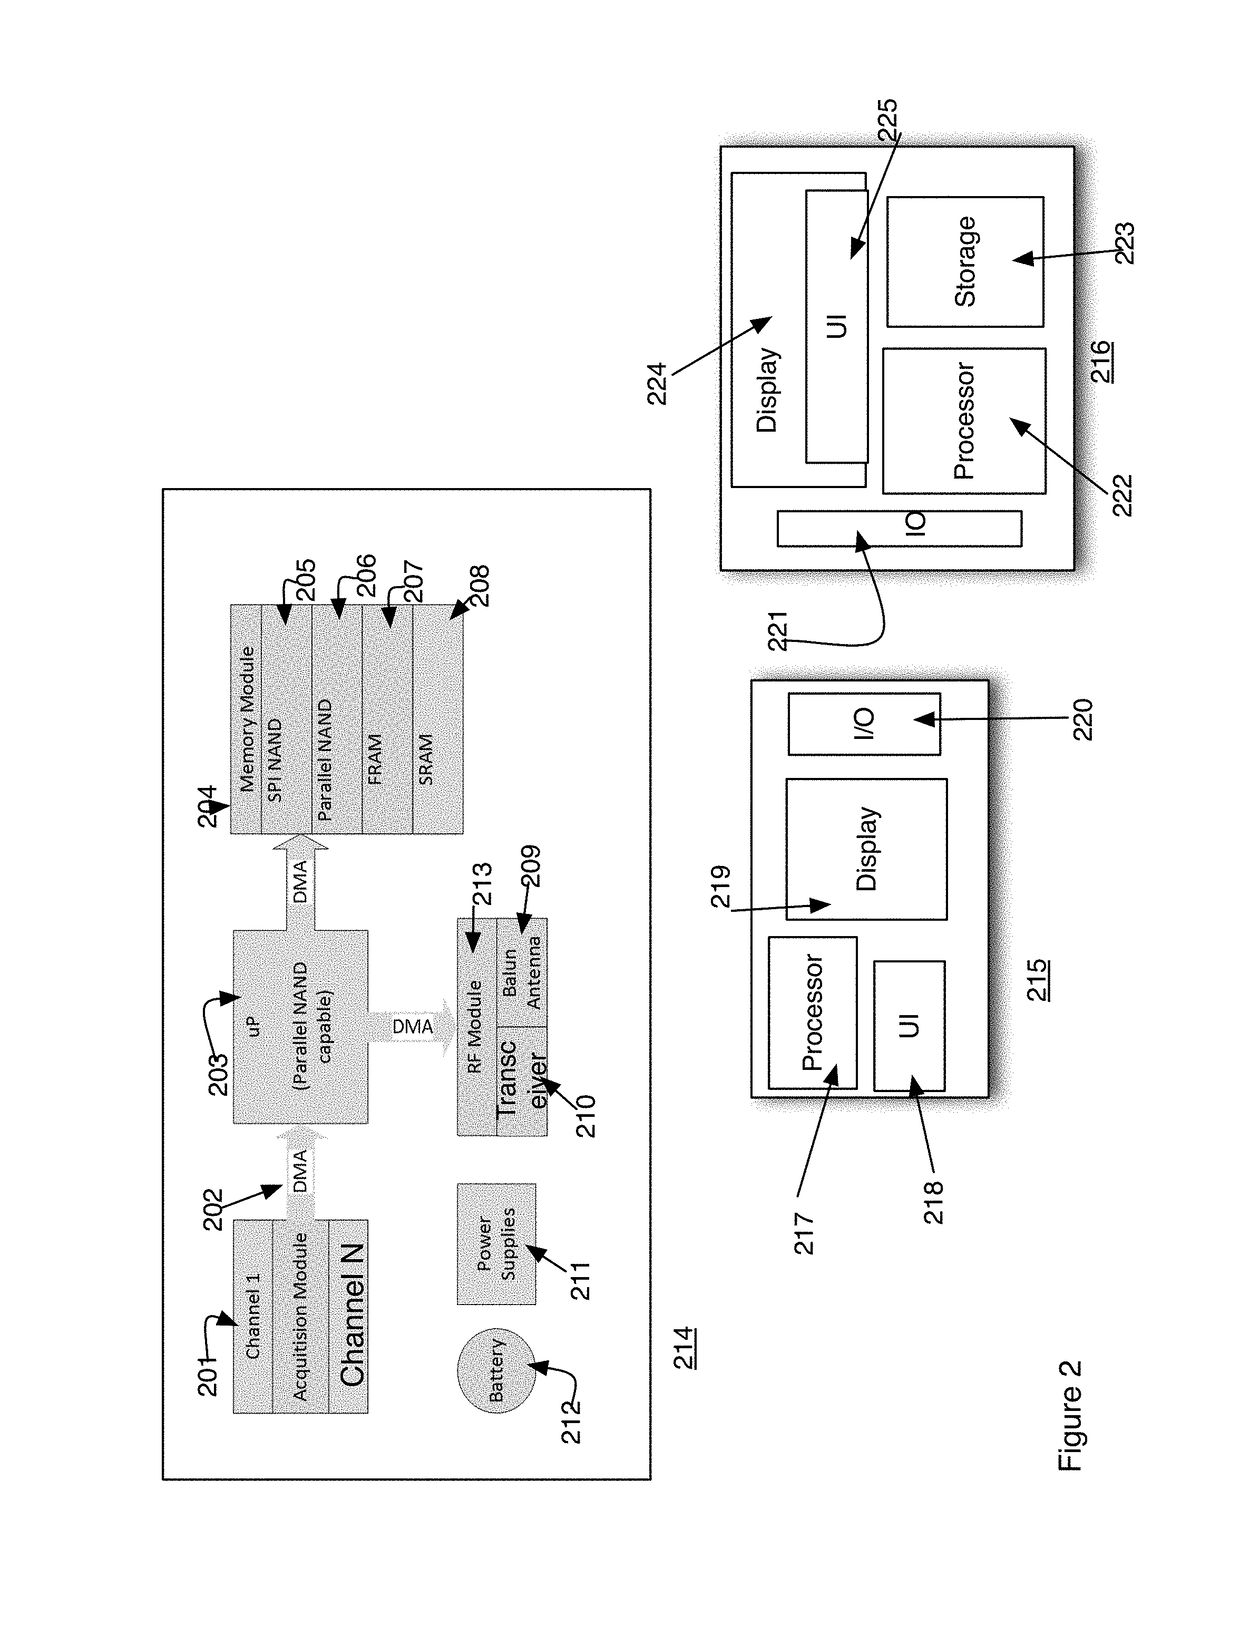 Electrocardiogram Device and Methods